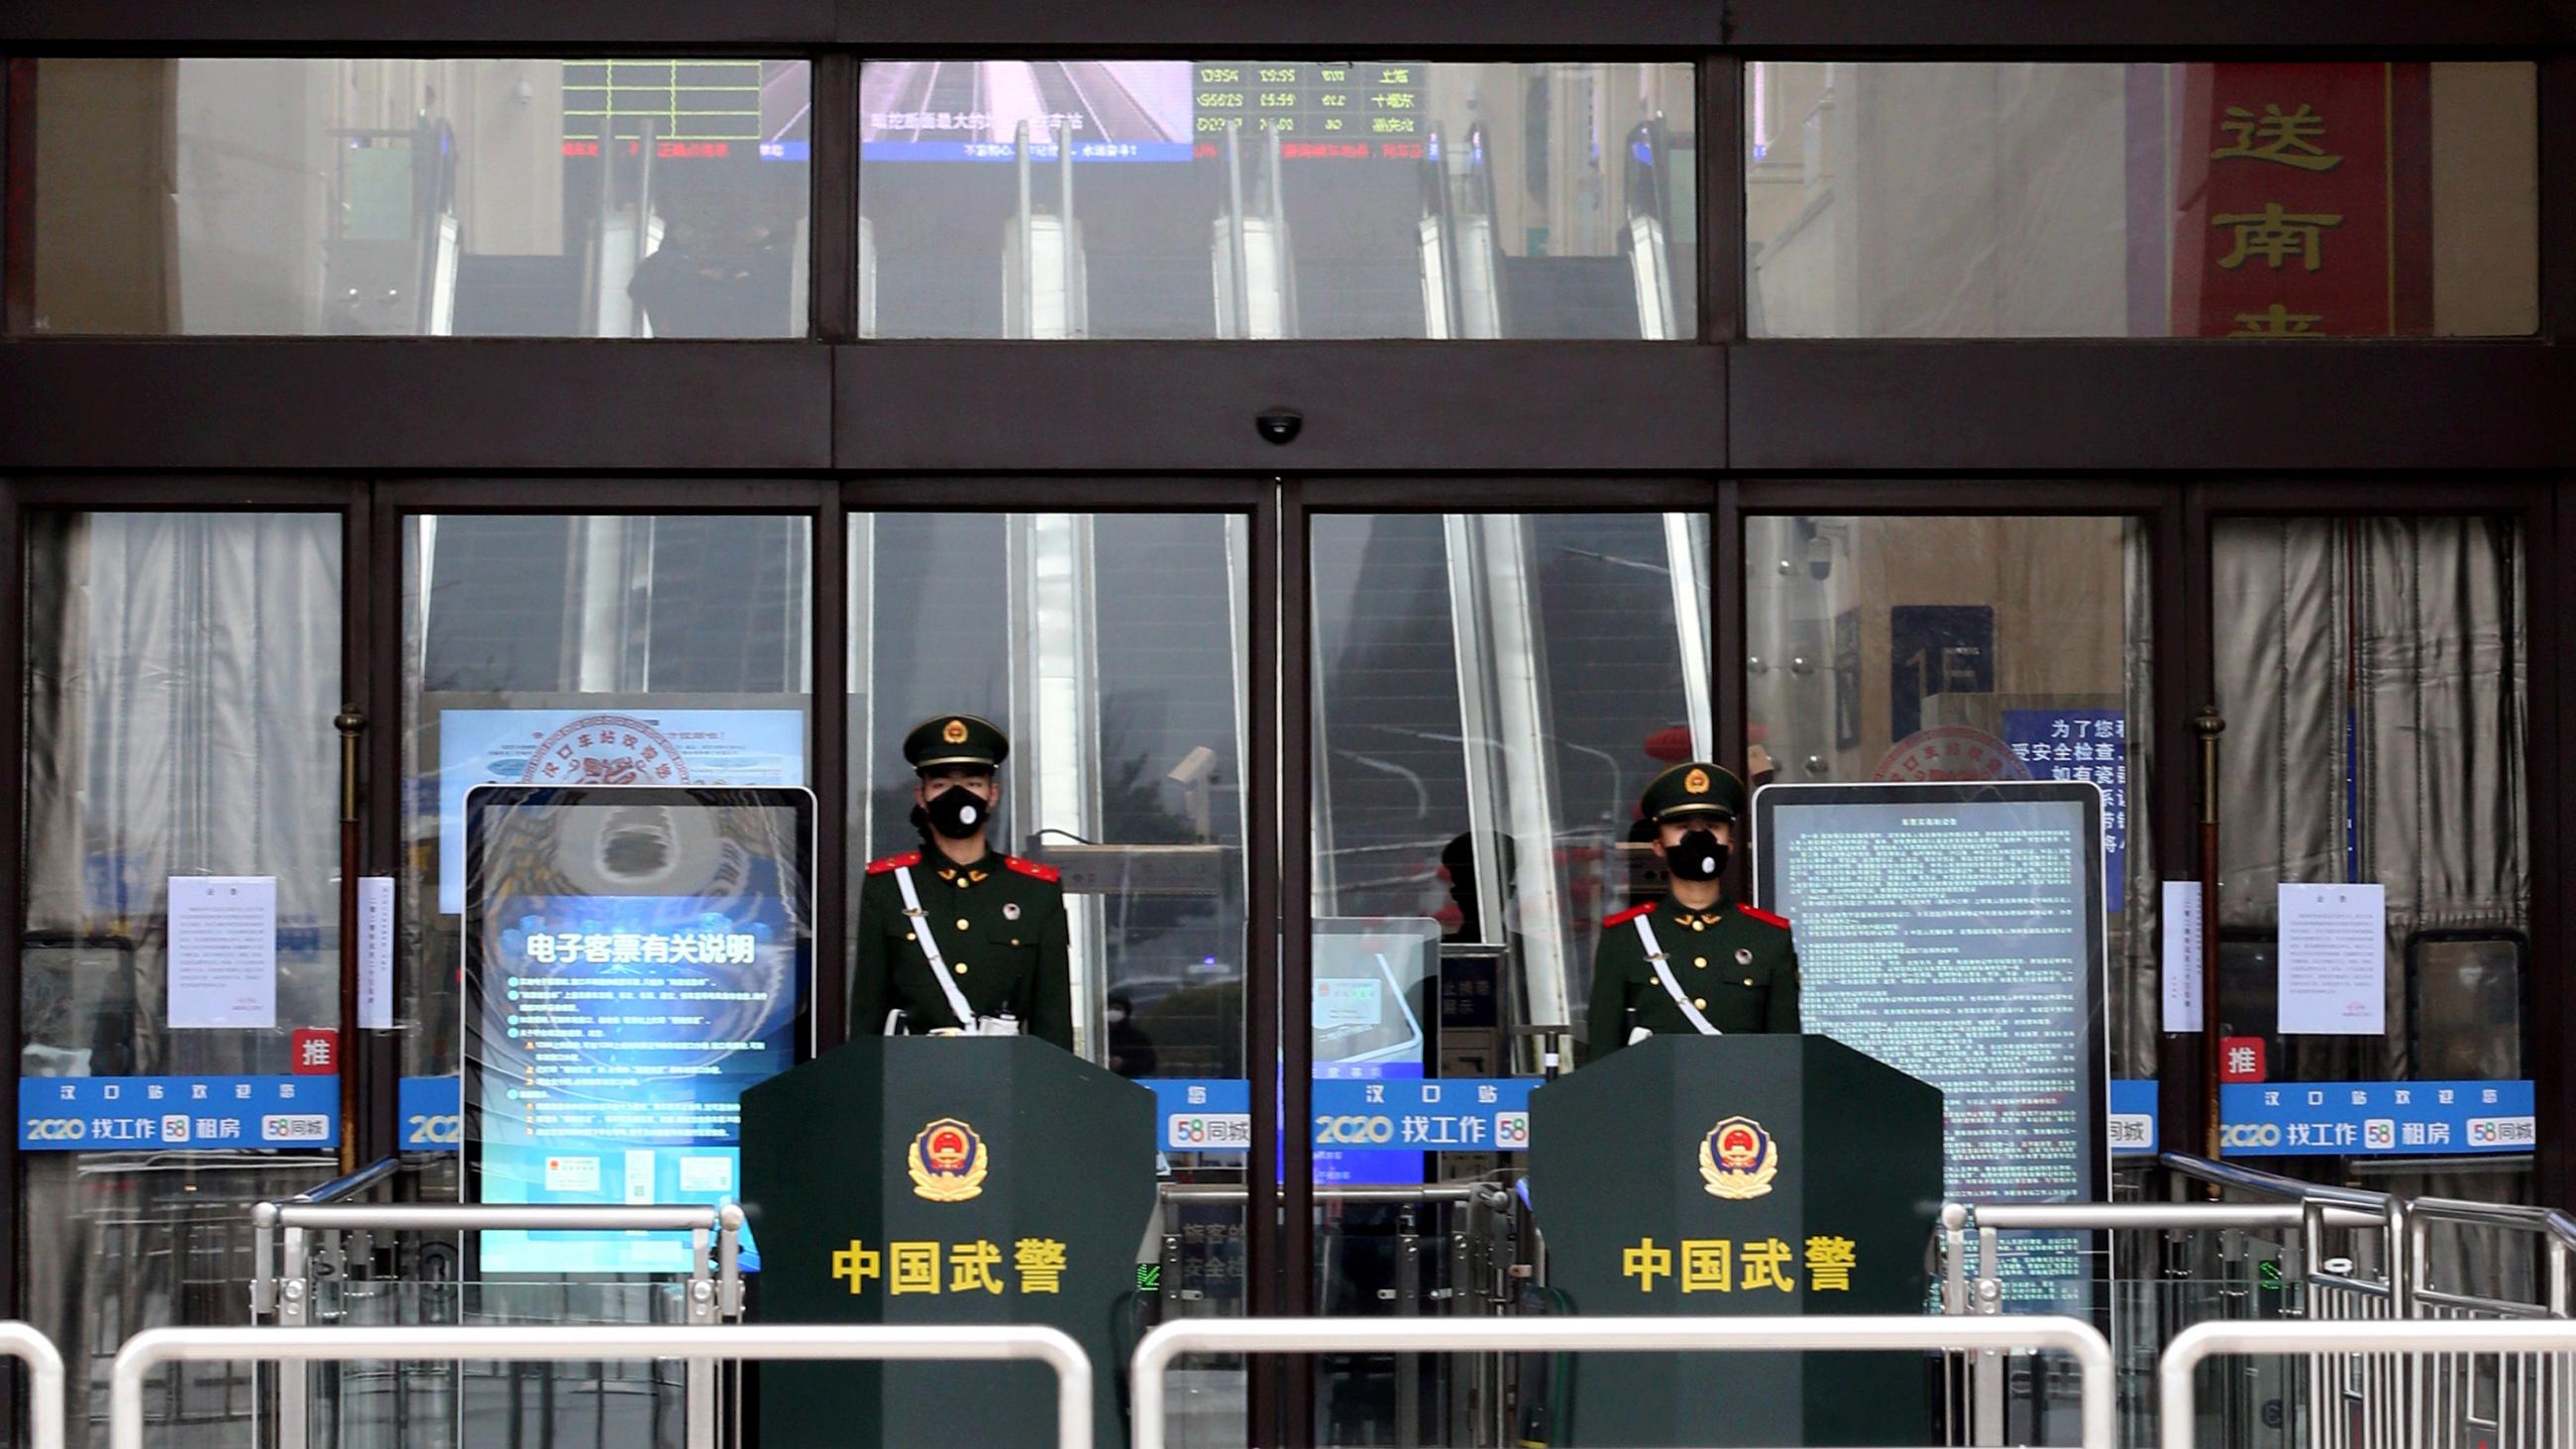 The photo shows the shuttered front of the grand entrance hall to the station with two soldiers wearing face masks out front.